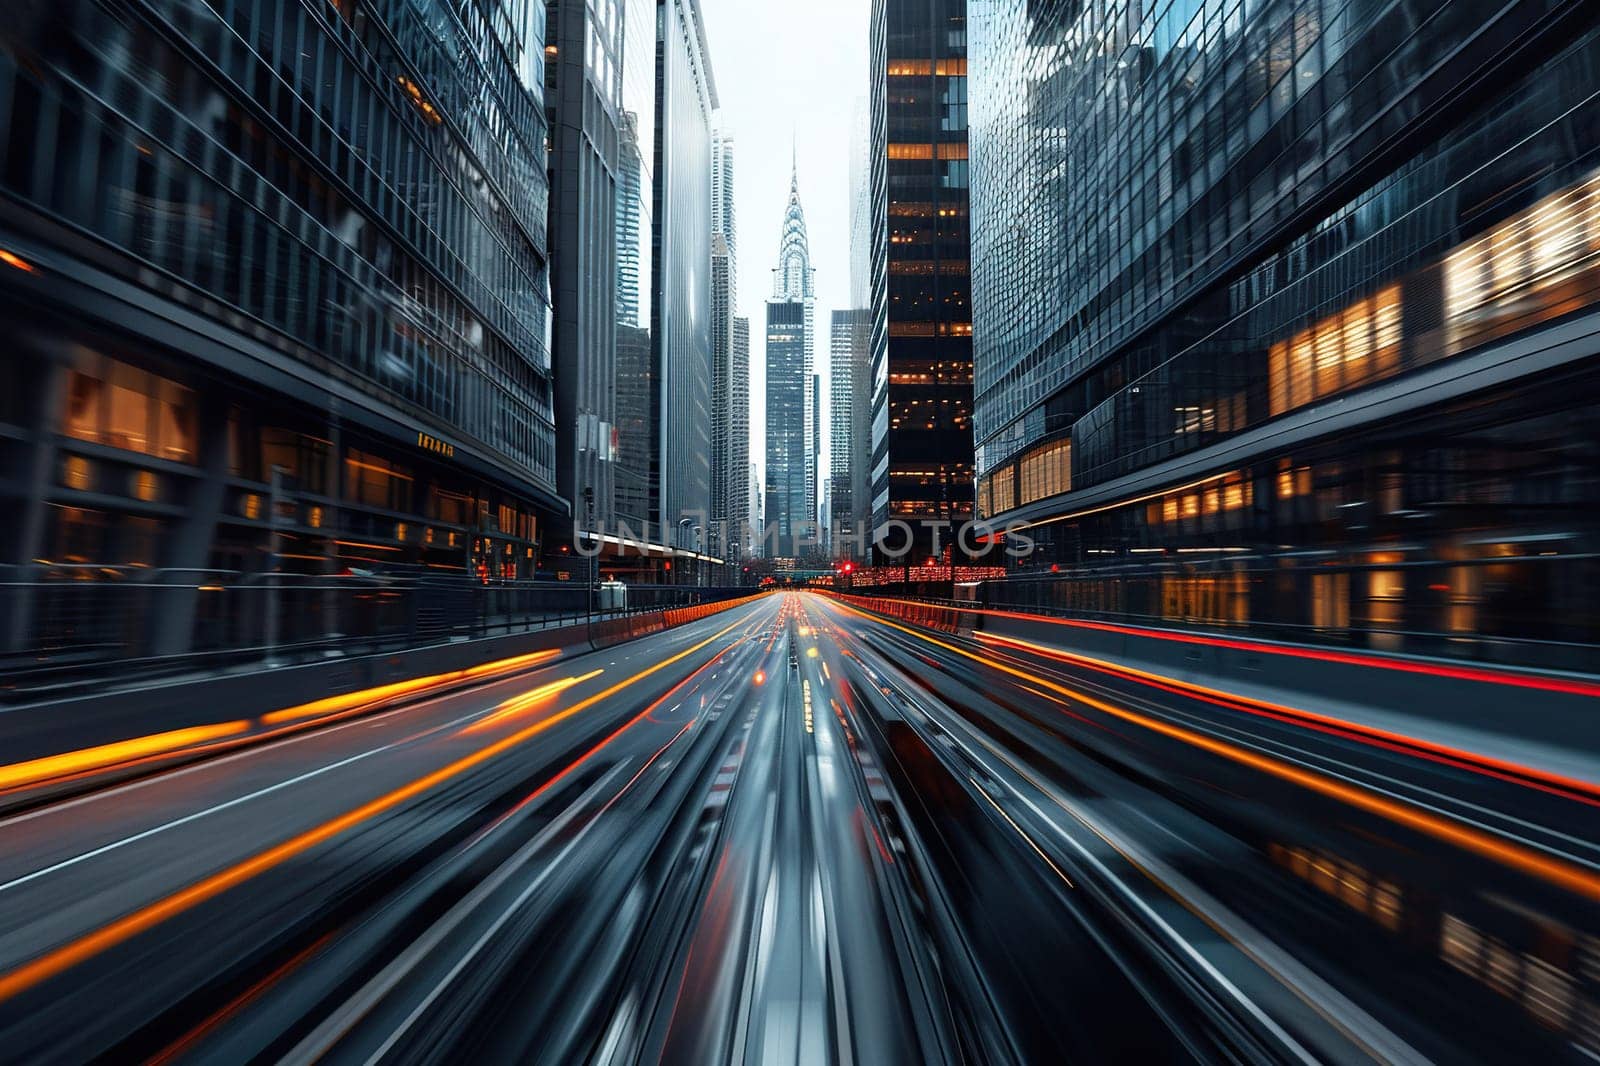 Photo in motion depicting a highway in a metropolis. Light paths against the background of skyscrapers. Generated by artificial intelligence by Vovmar